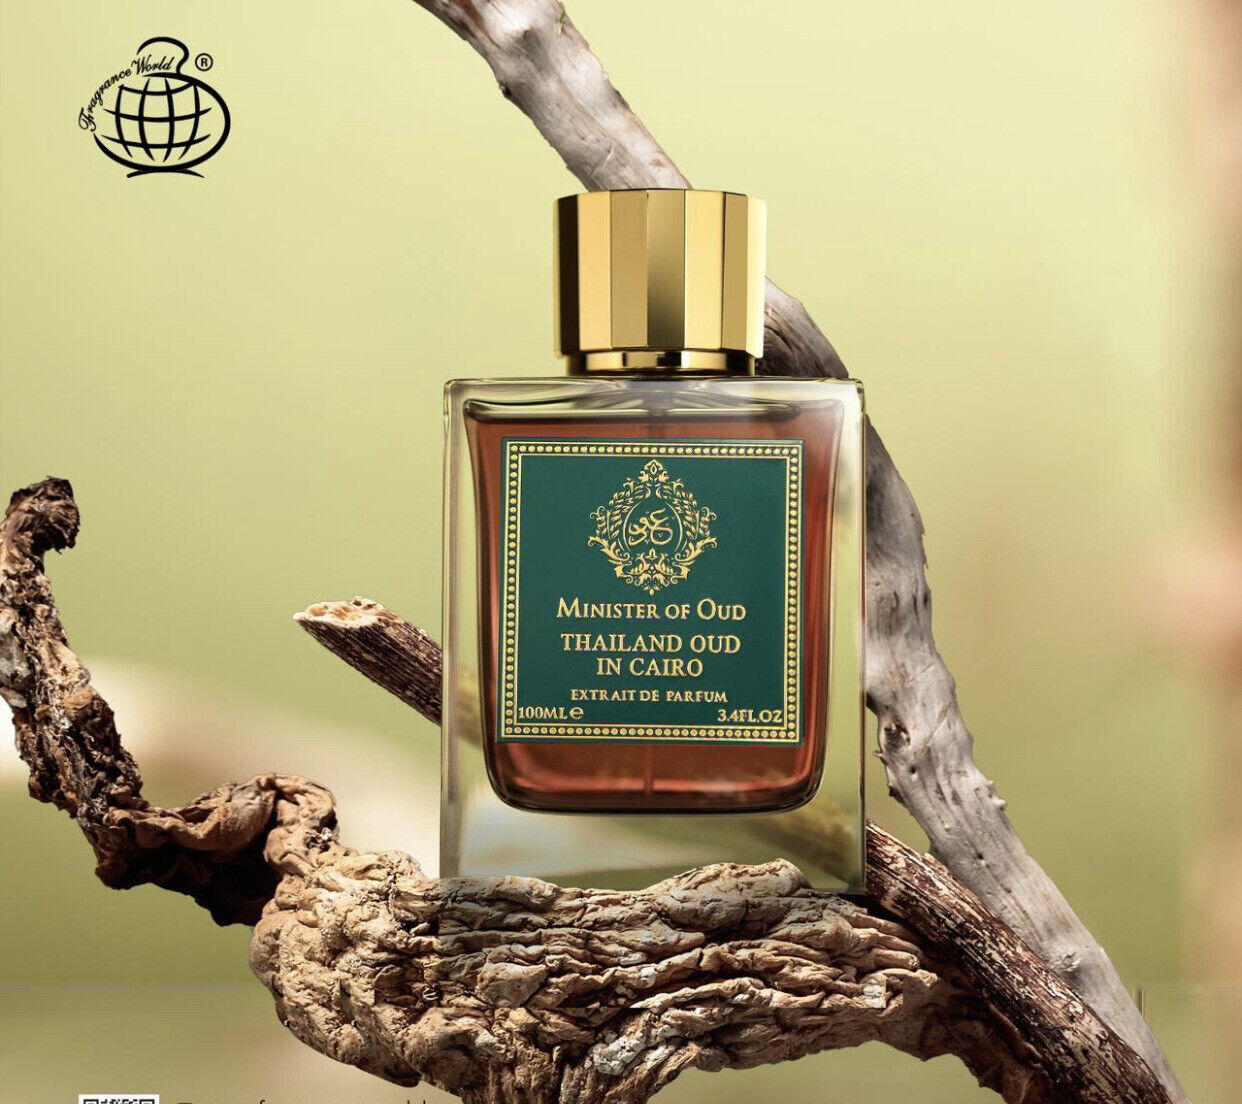 Ministry of Oud Thailand Oud in Cairo Edp 100 Ml By Fragrance World - Newest